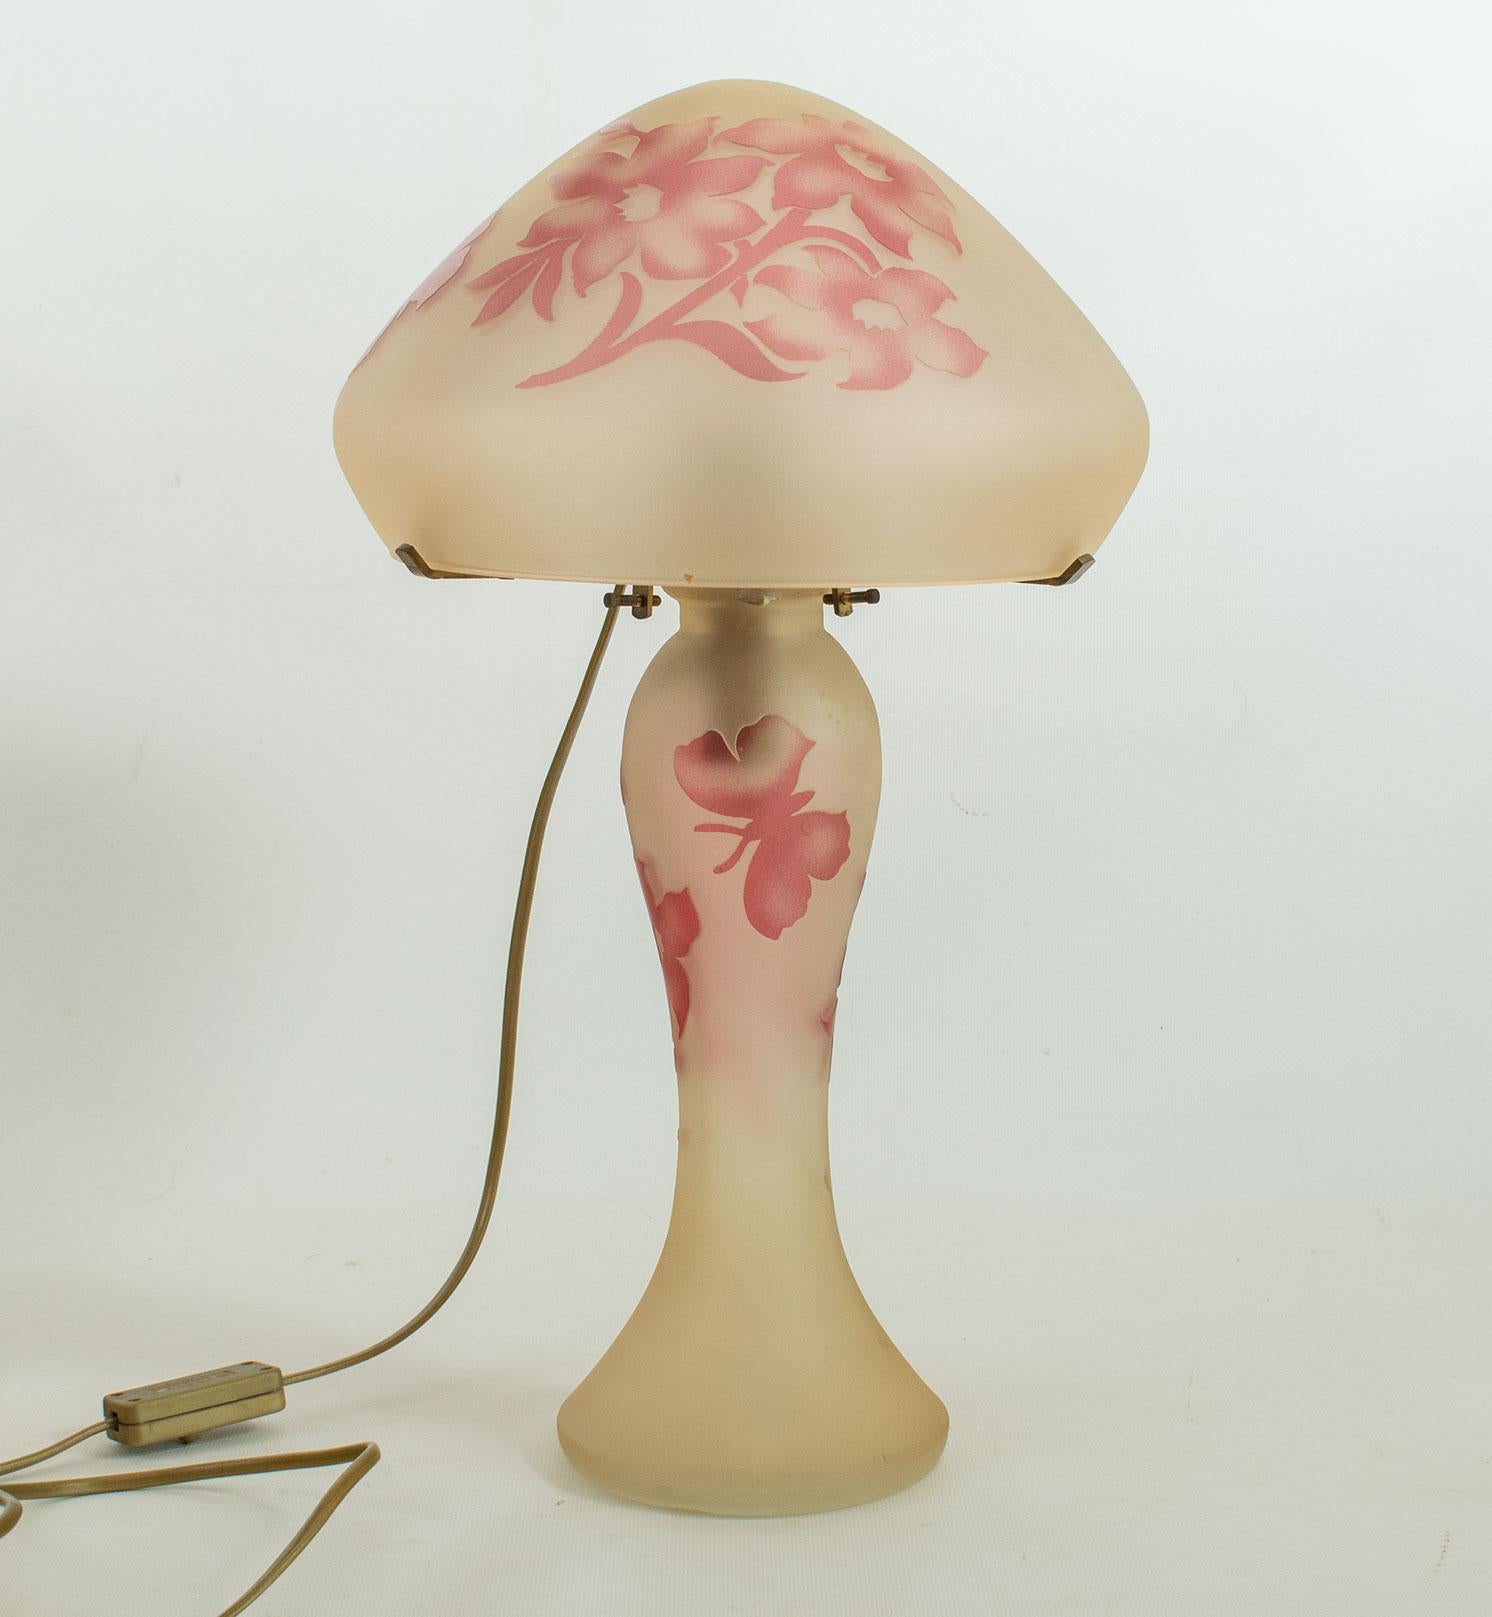 Art Nouveau VIANNE - Large Mushroom lamp in multi-layered glass, signed by the maker